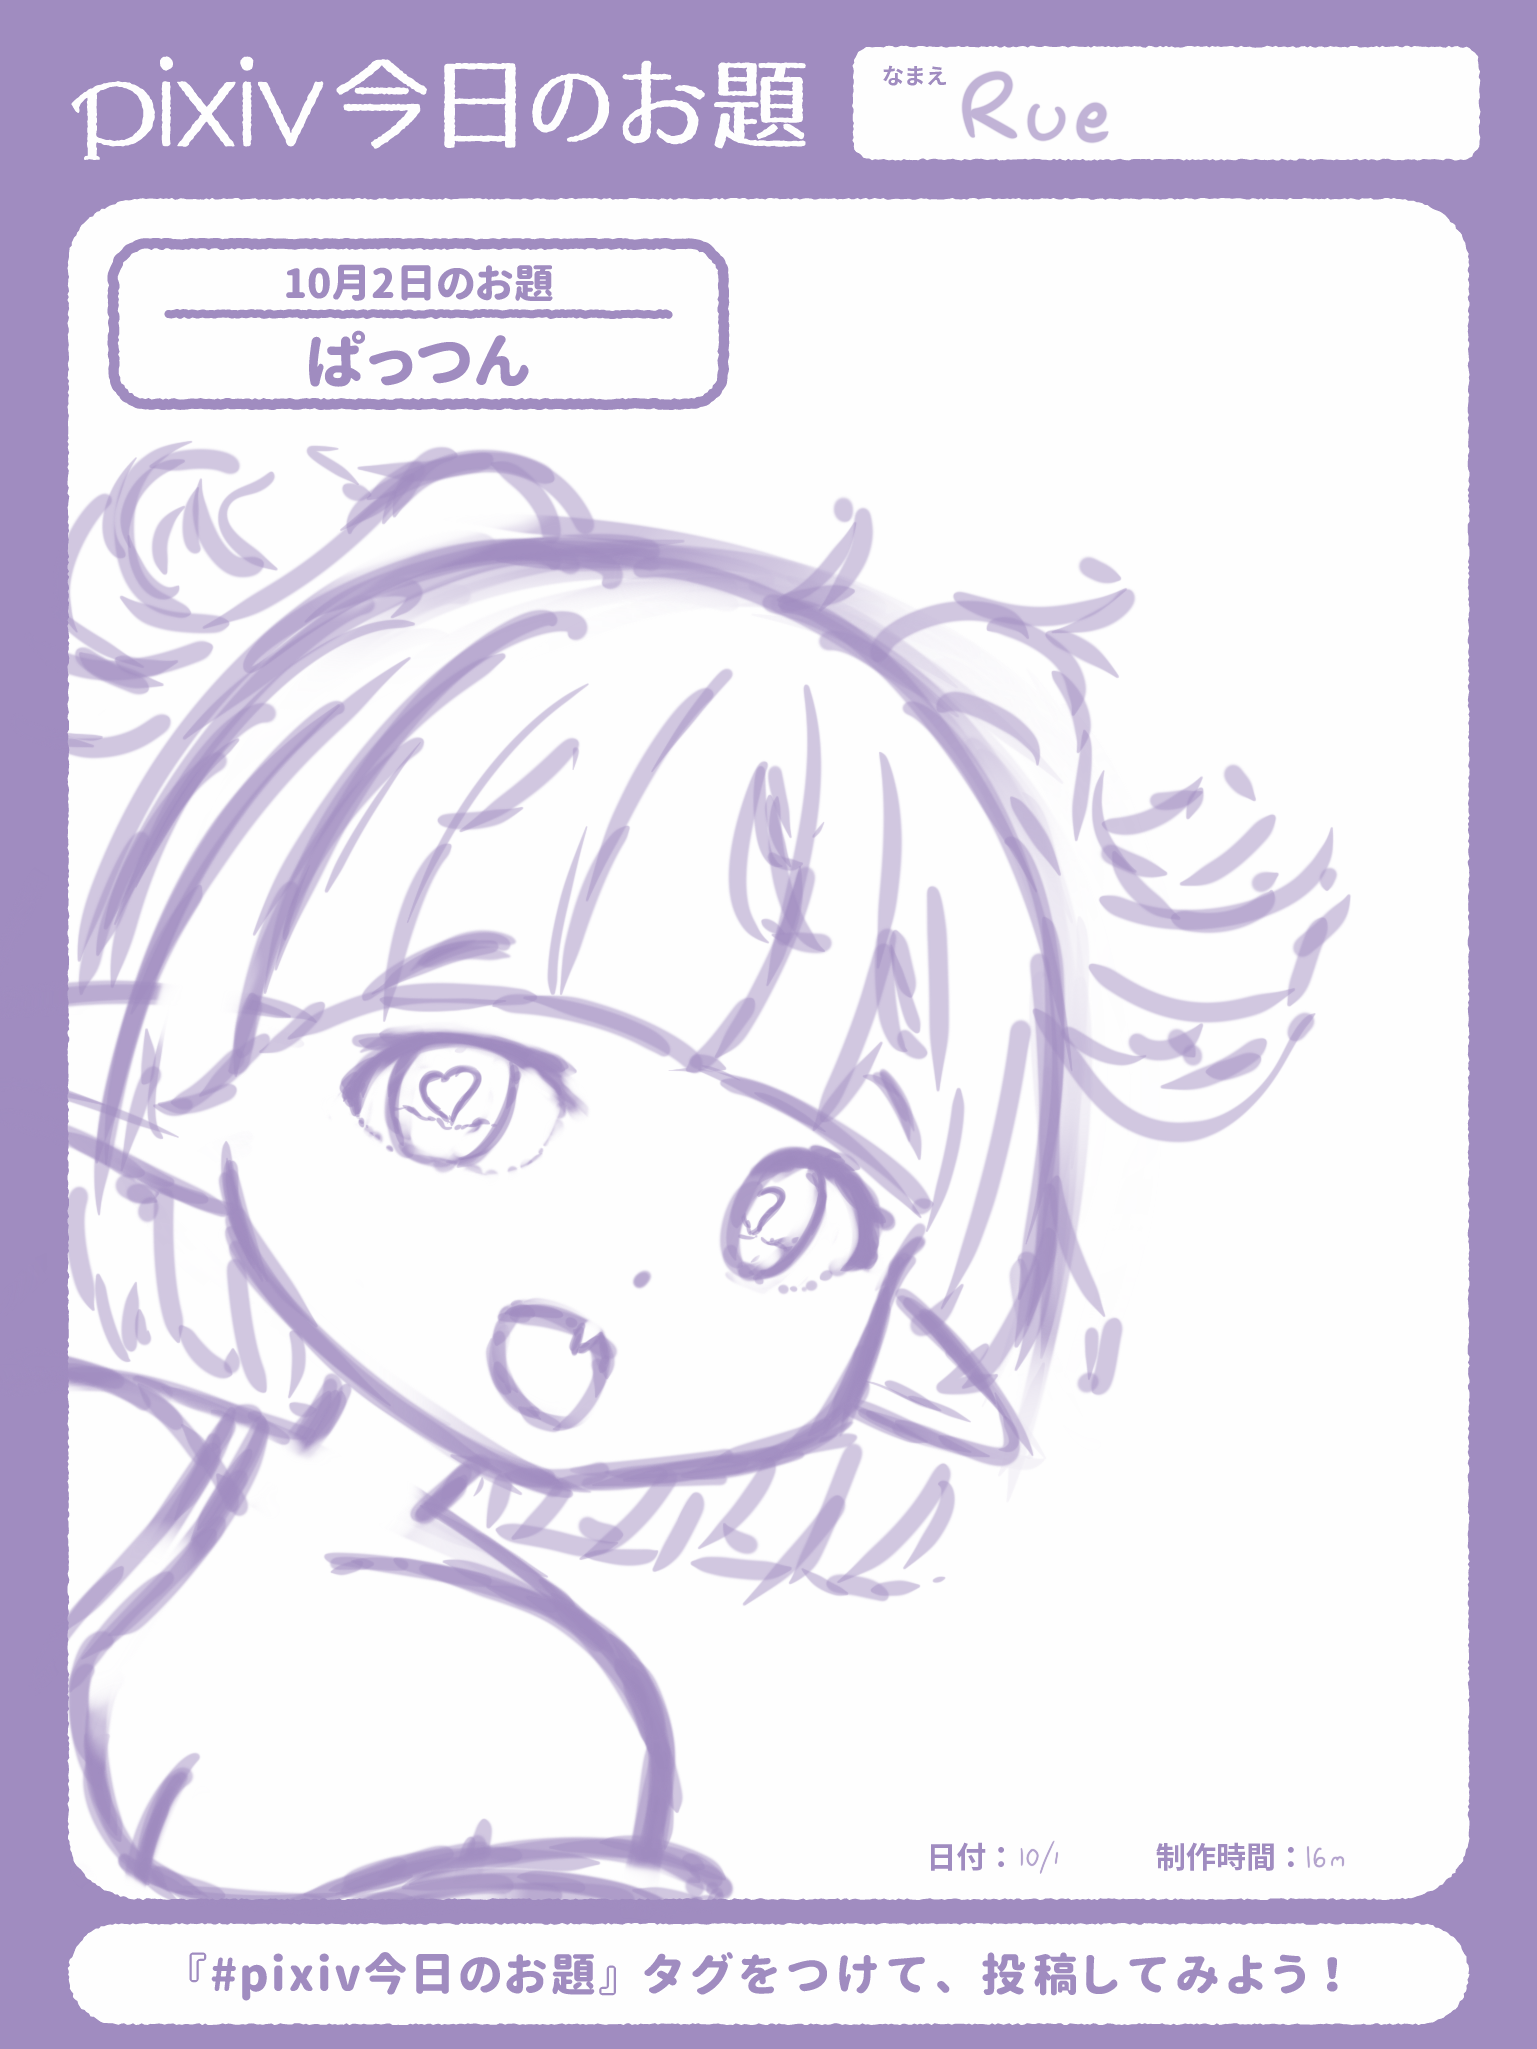 My sketch for today’s Pixiv theme of #ぱっつん. It’s me peeking from the corner!